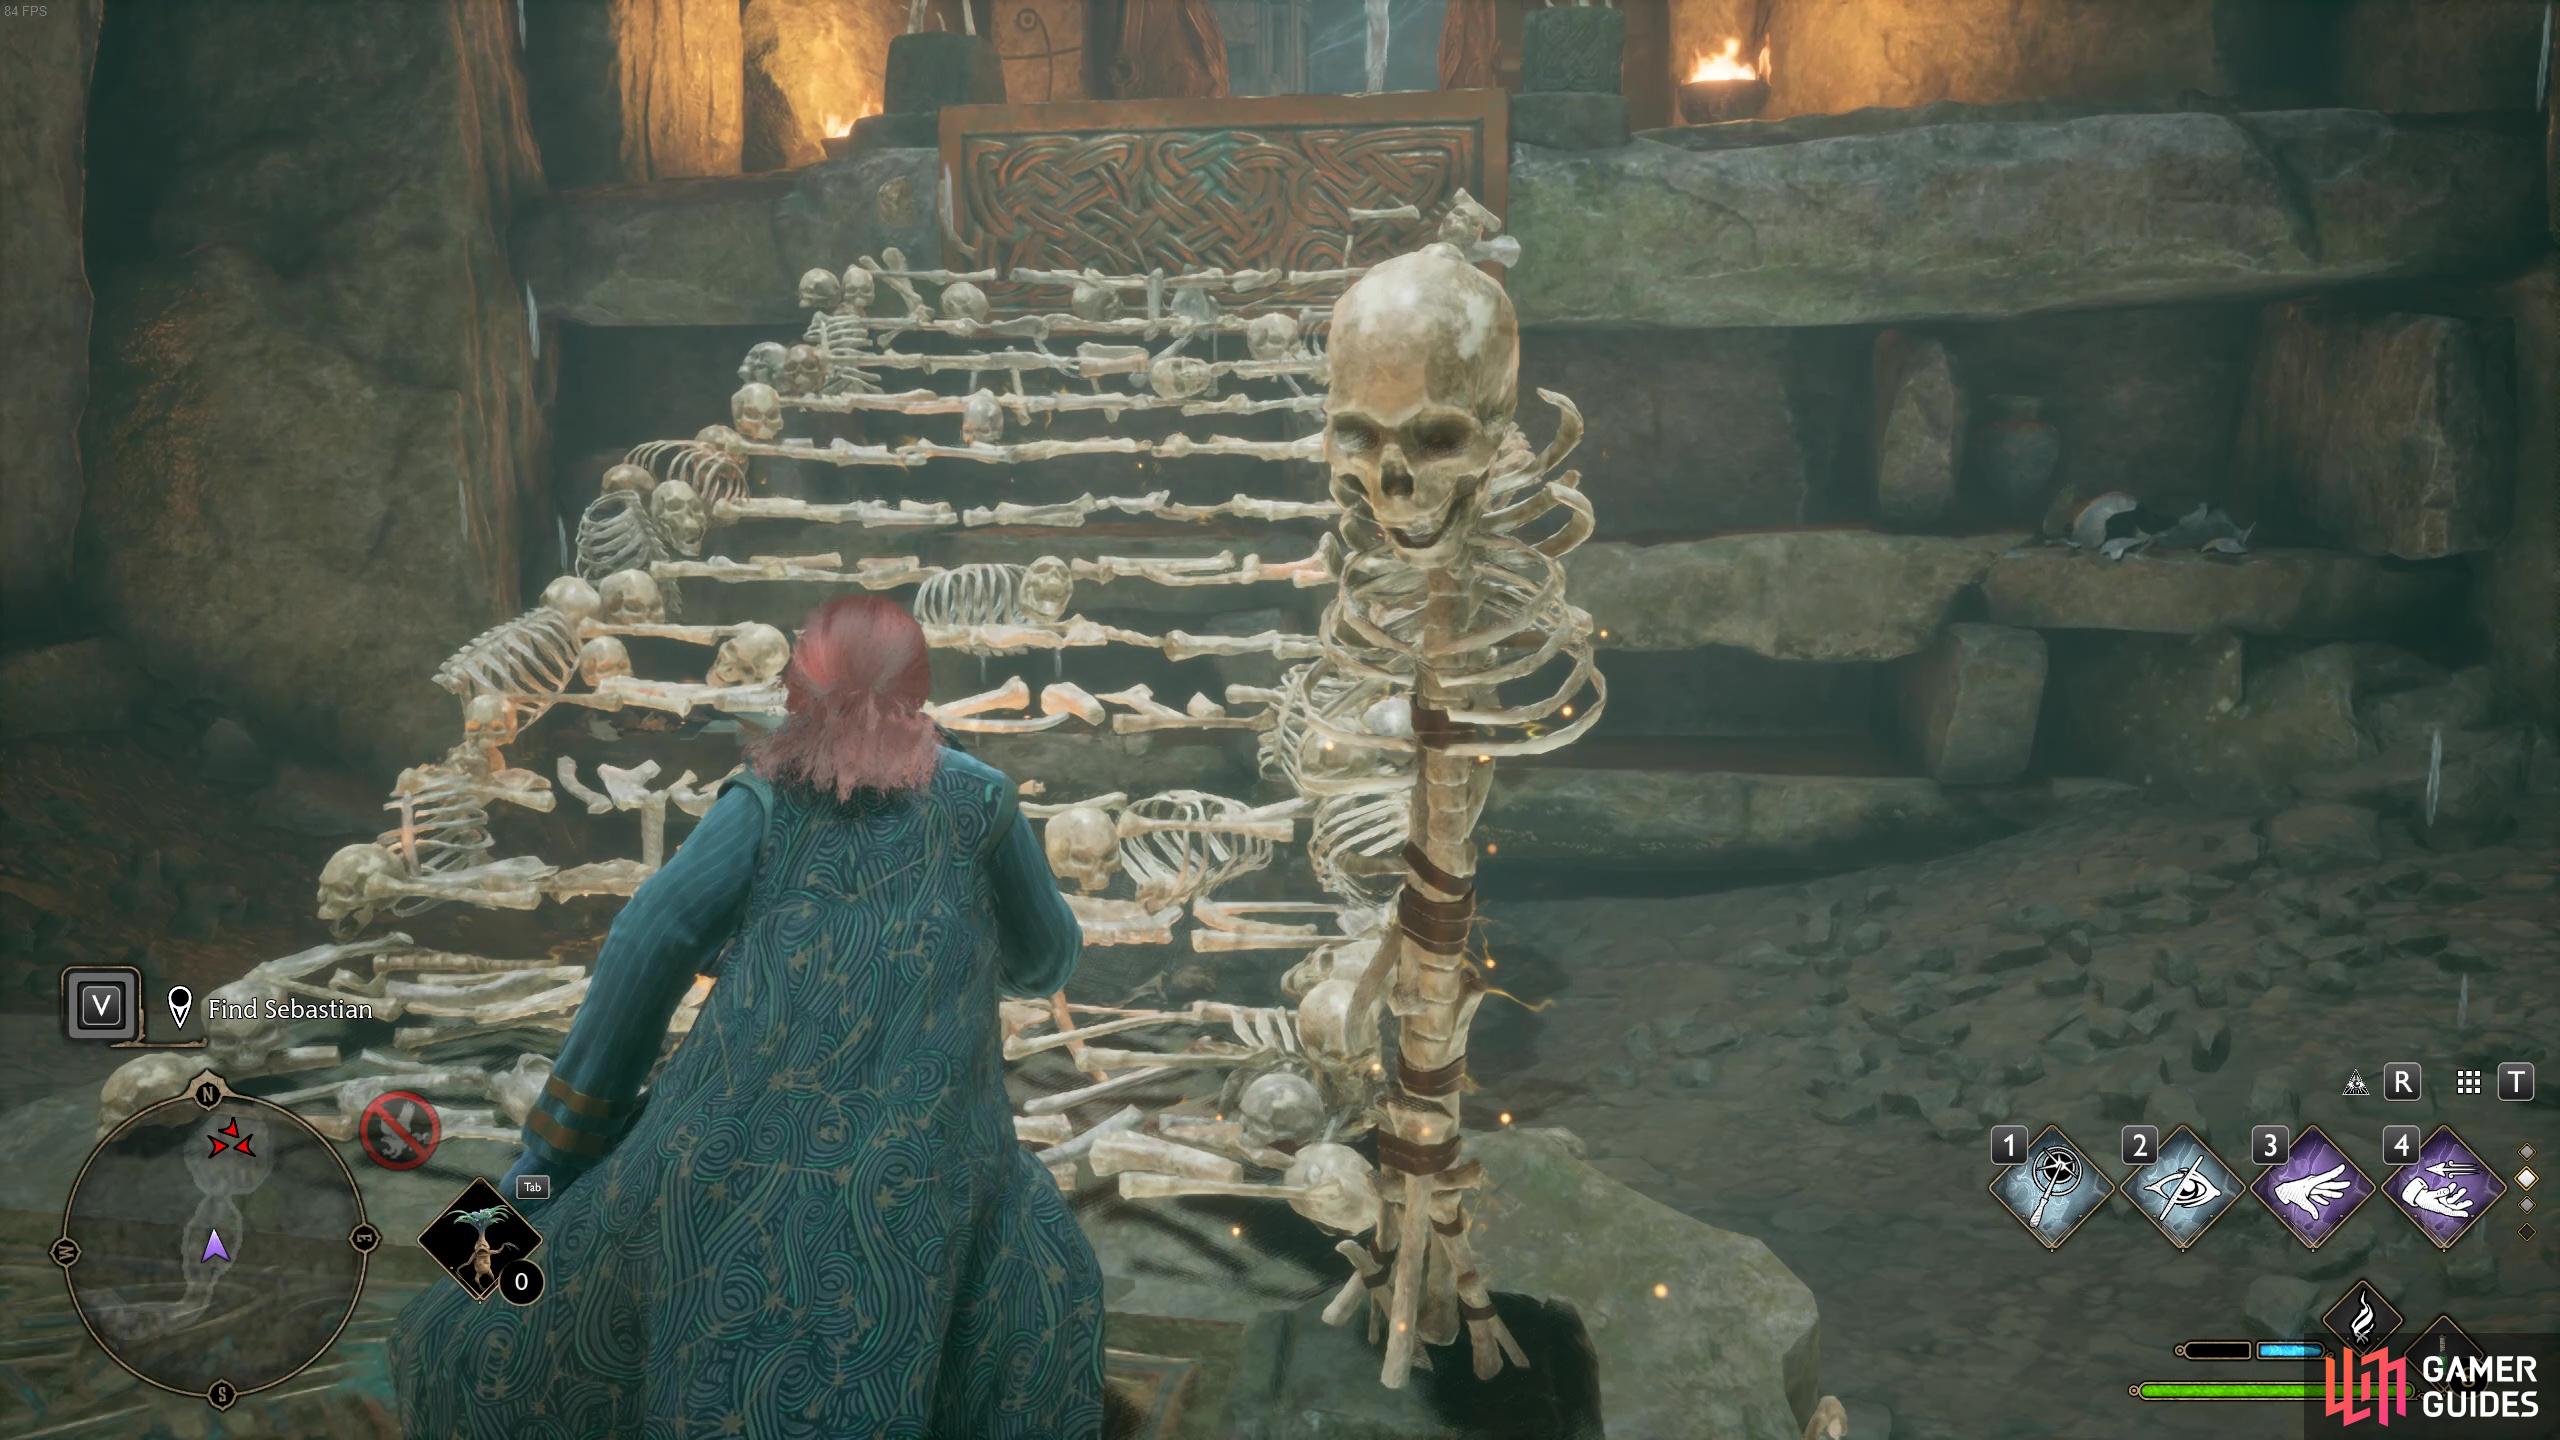 Use the skeletons in the tombs to make a set of stairs up to the room where you’ll find Sebastian. 